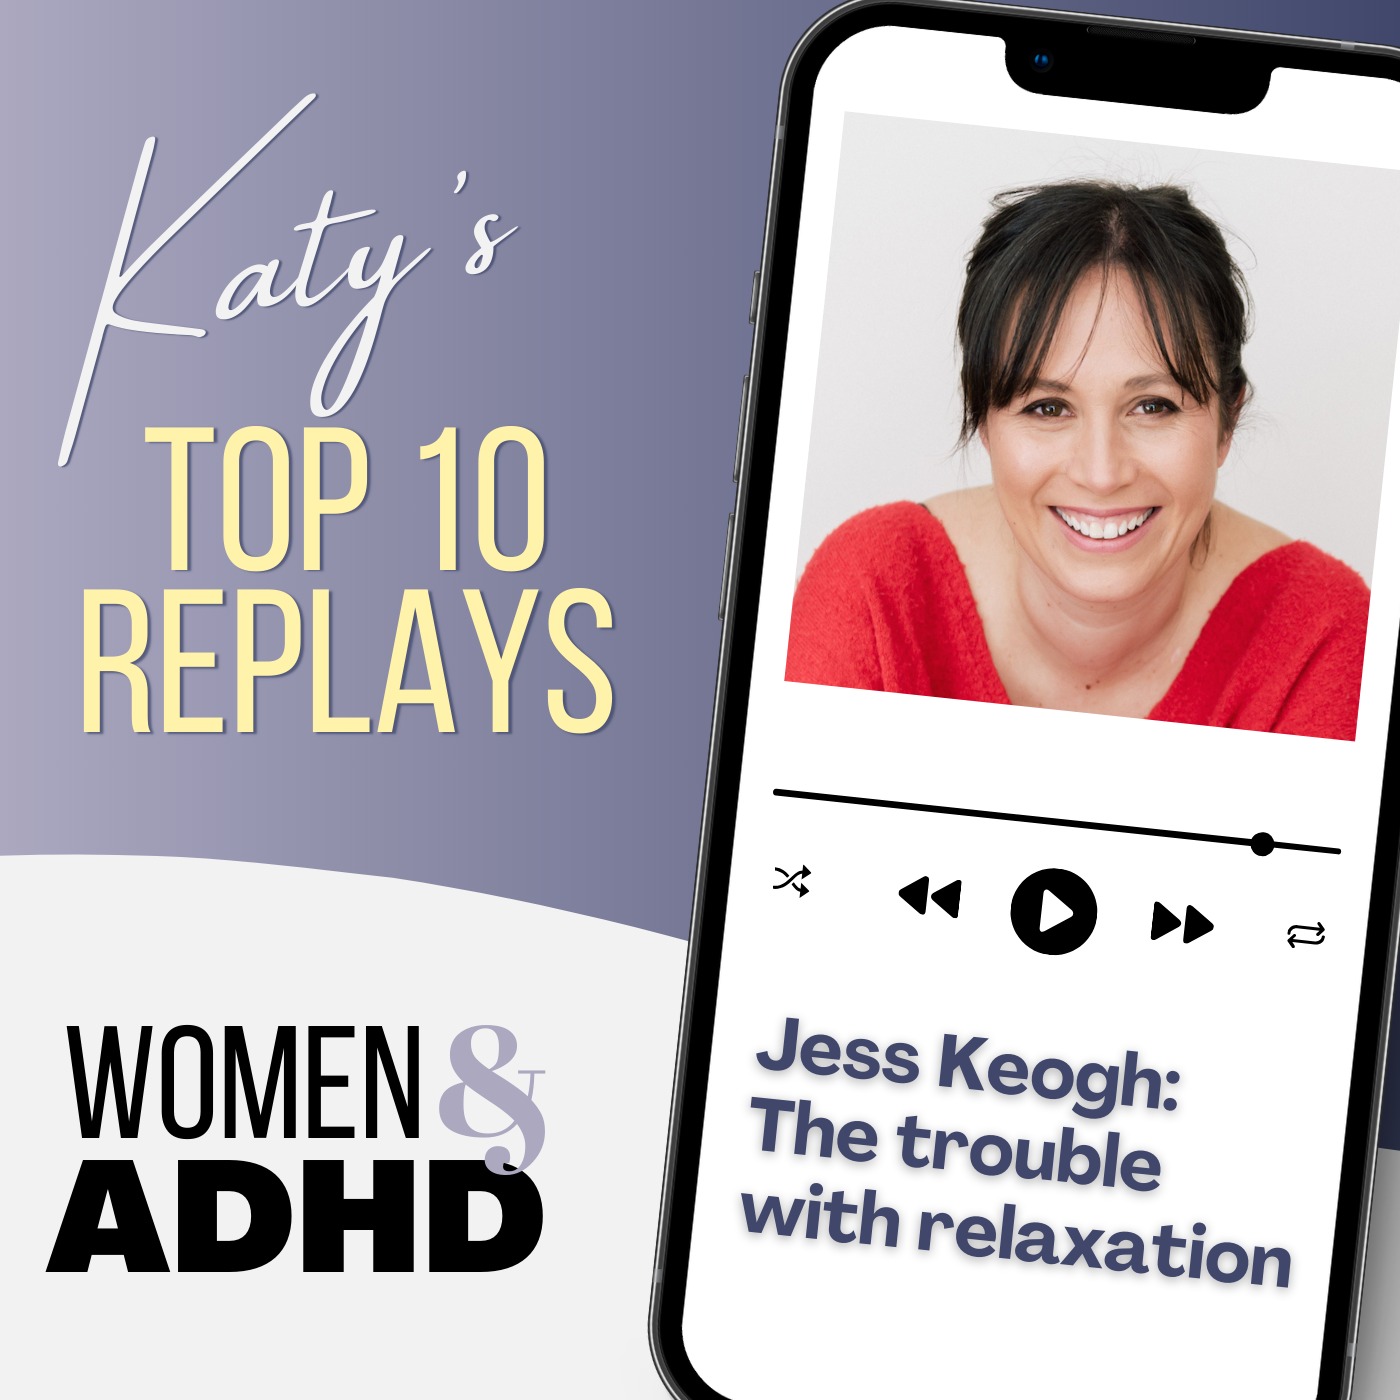 Jess Keogh: The trouble with relaxation [Top 10 Replay]